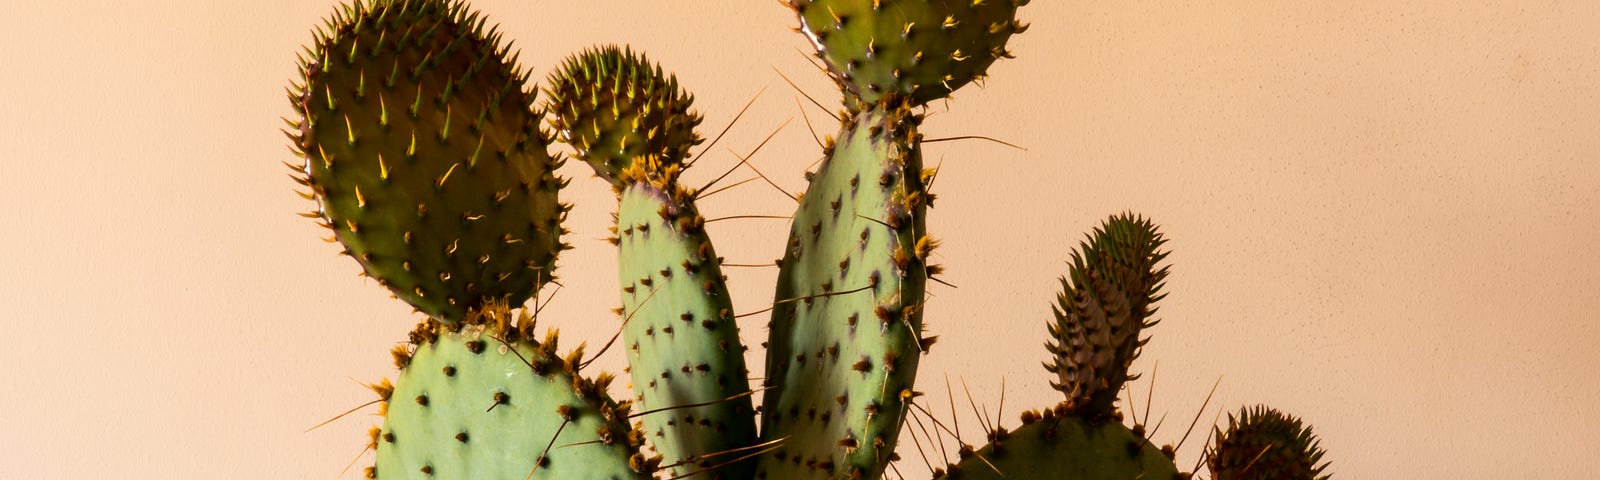 An image of a prickly green cactus.